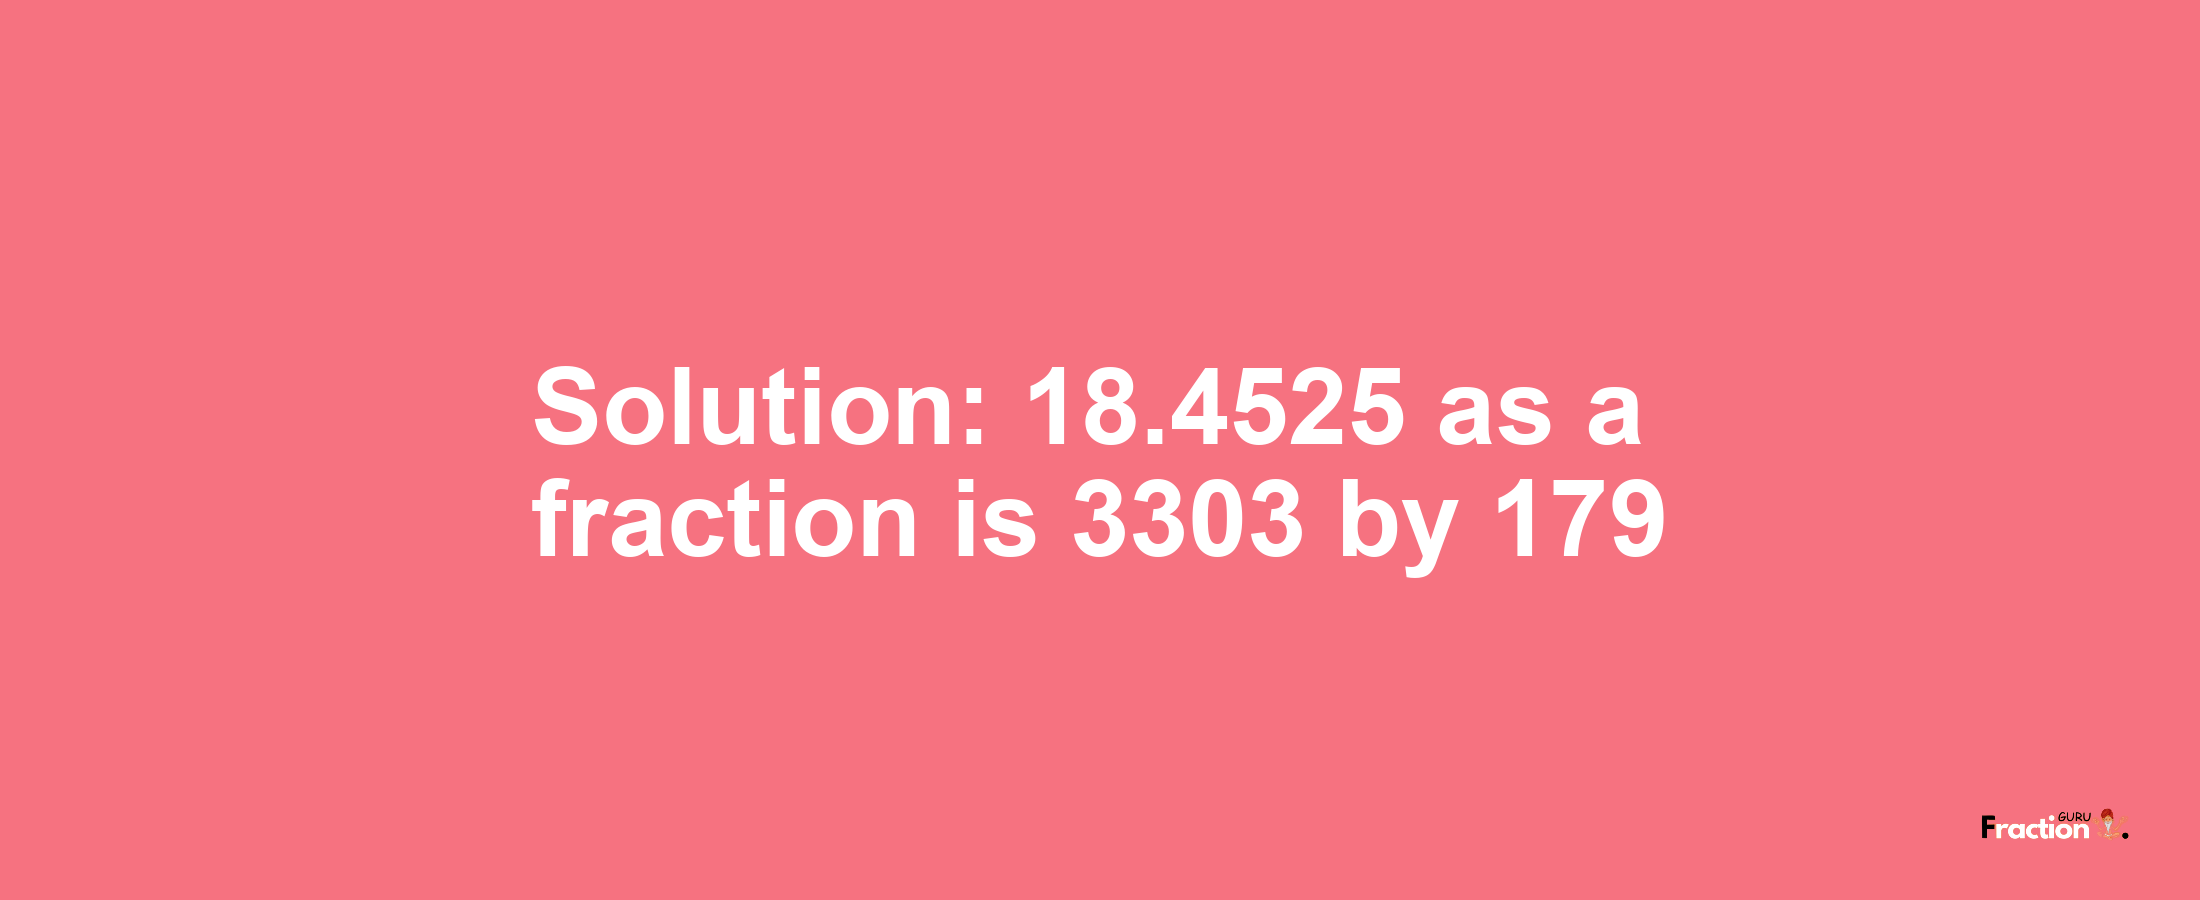 Solution:18.4525 as a fraction is 3303/179